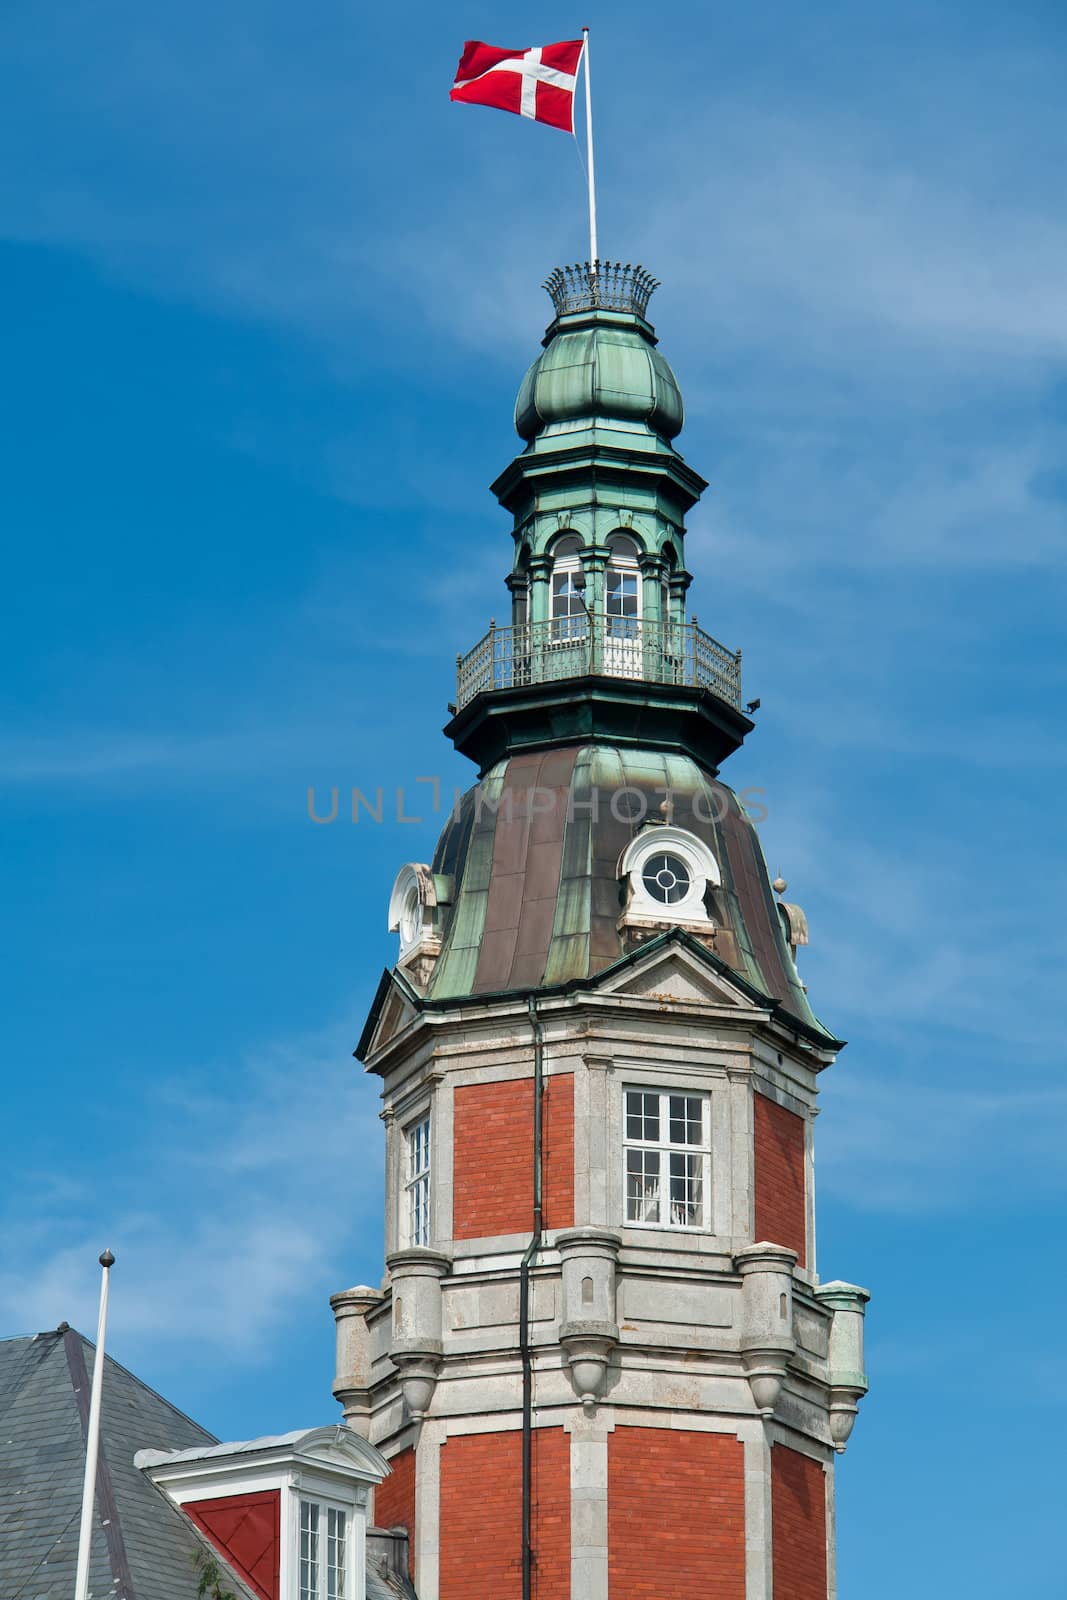 Flag of Denmark up high in the air with blue sky vertical background